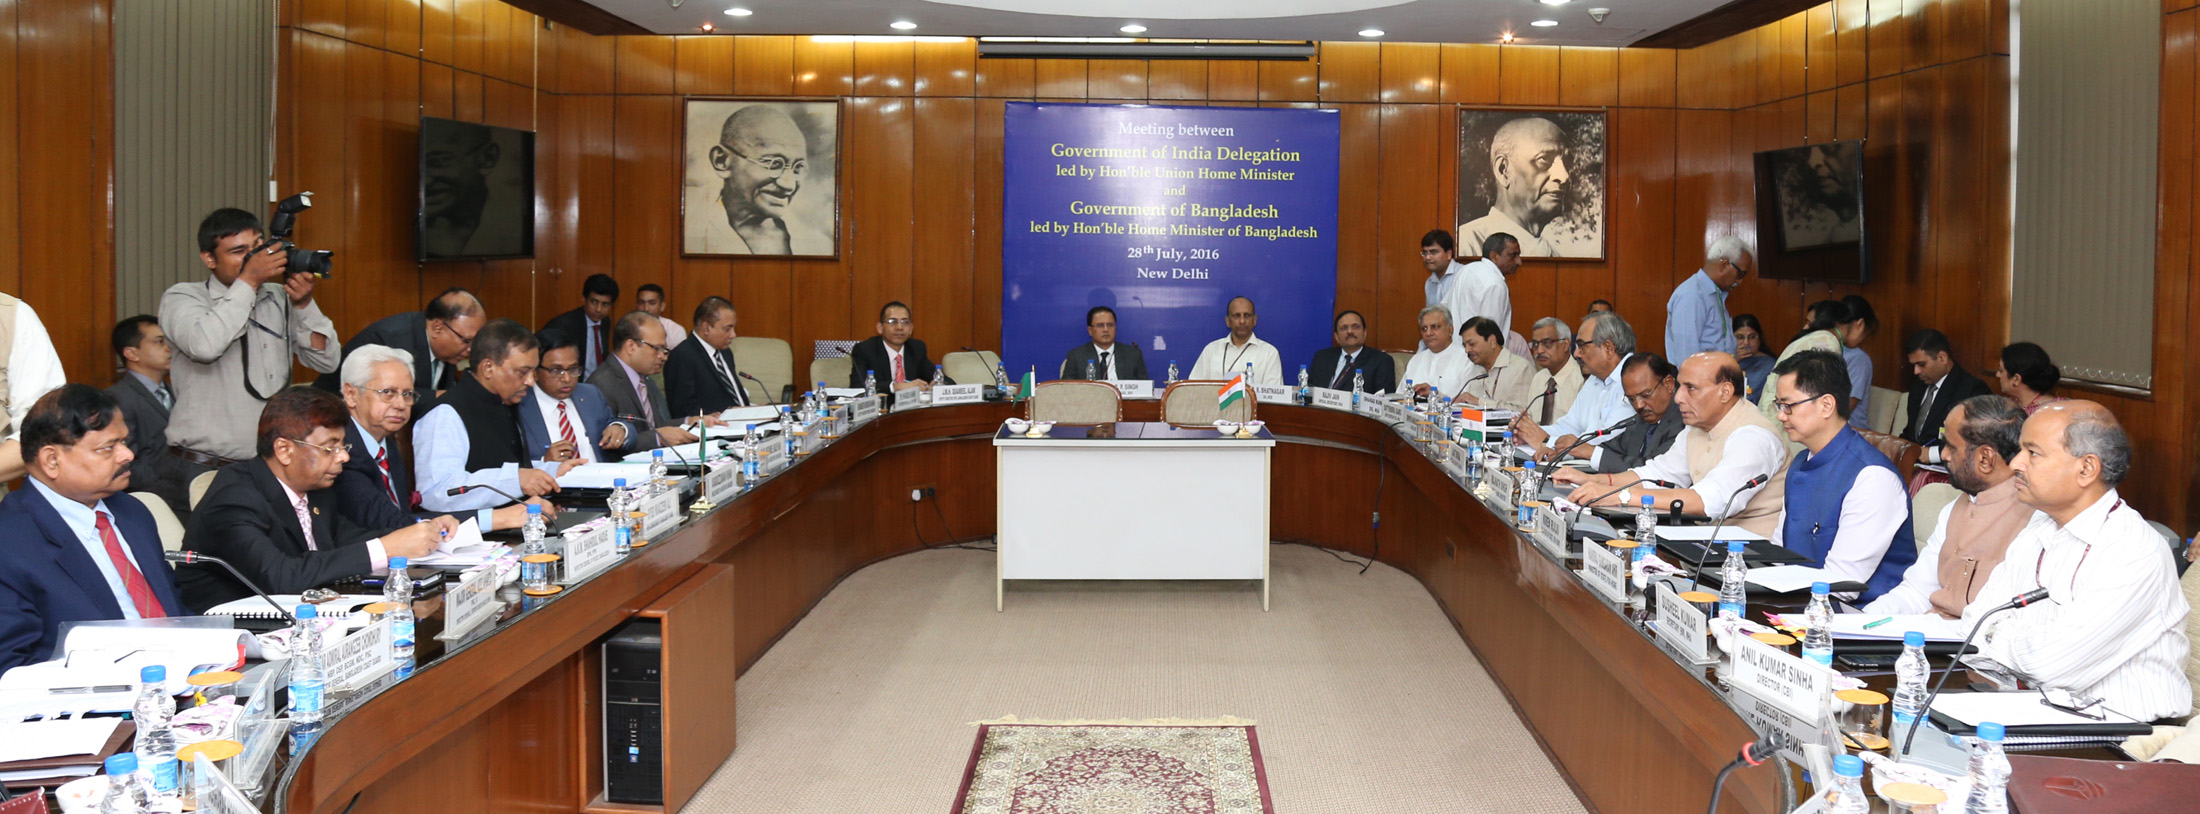 A delegation led by the Home Minister of Bangladesh, Mr. Asaduzzaman Khan and Indian delegation led by the Union Home Minister, Shri Rajnath Singh, holding Home Minister level bilateral talks between India and Bangladesh, in New Delhi on July 28, 2016.